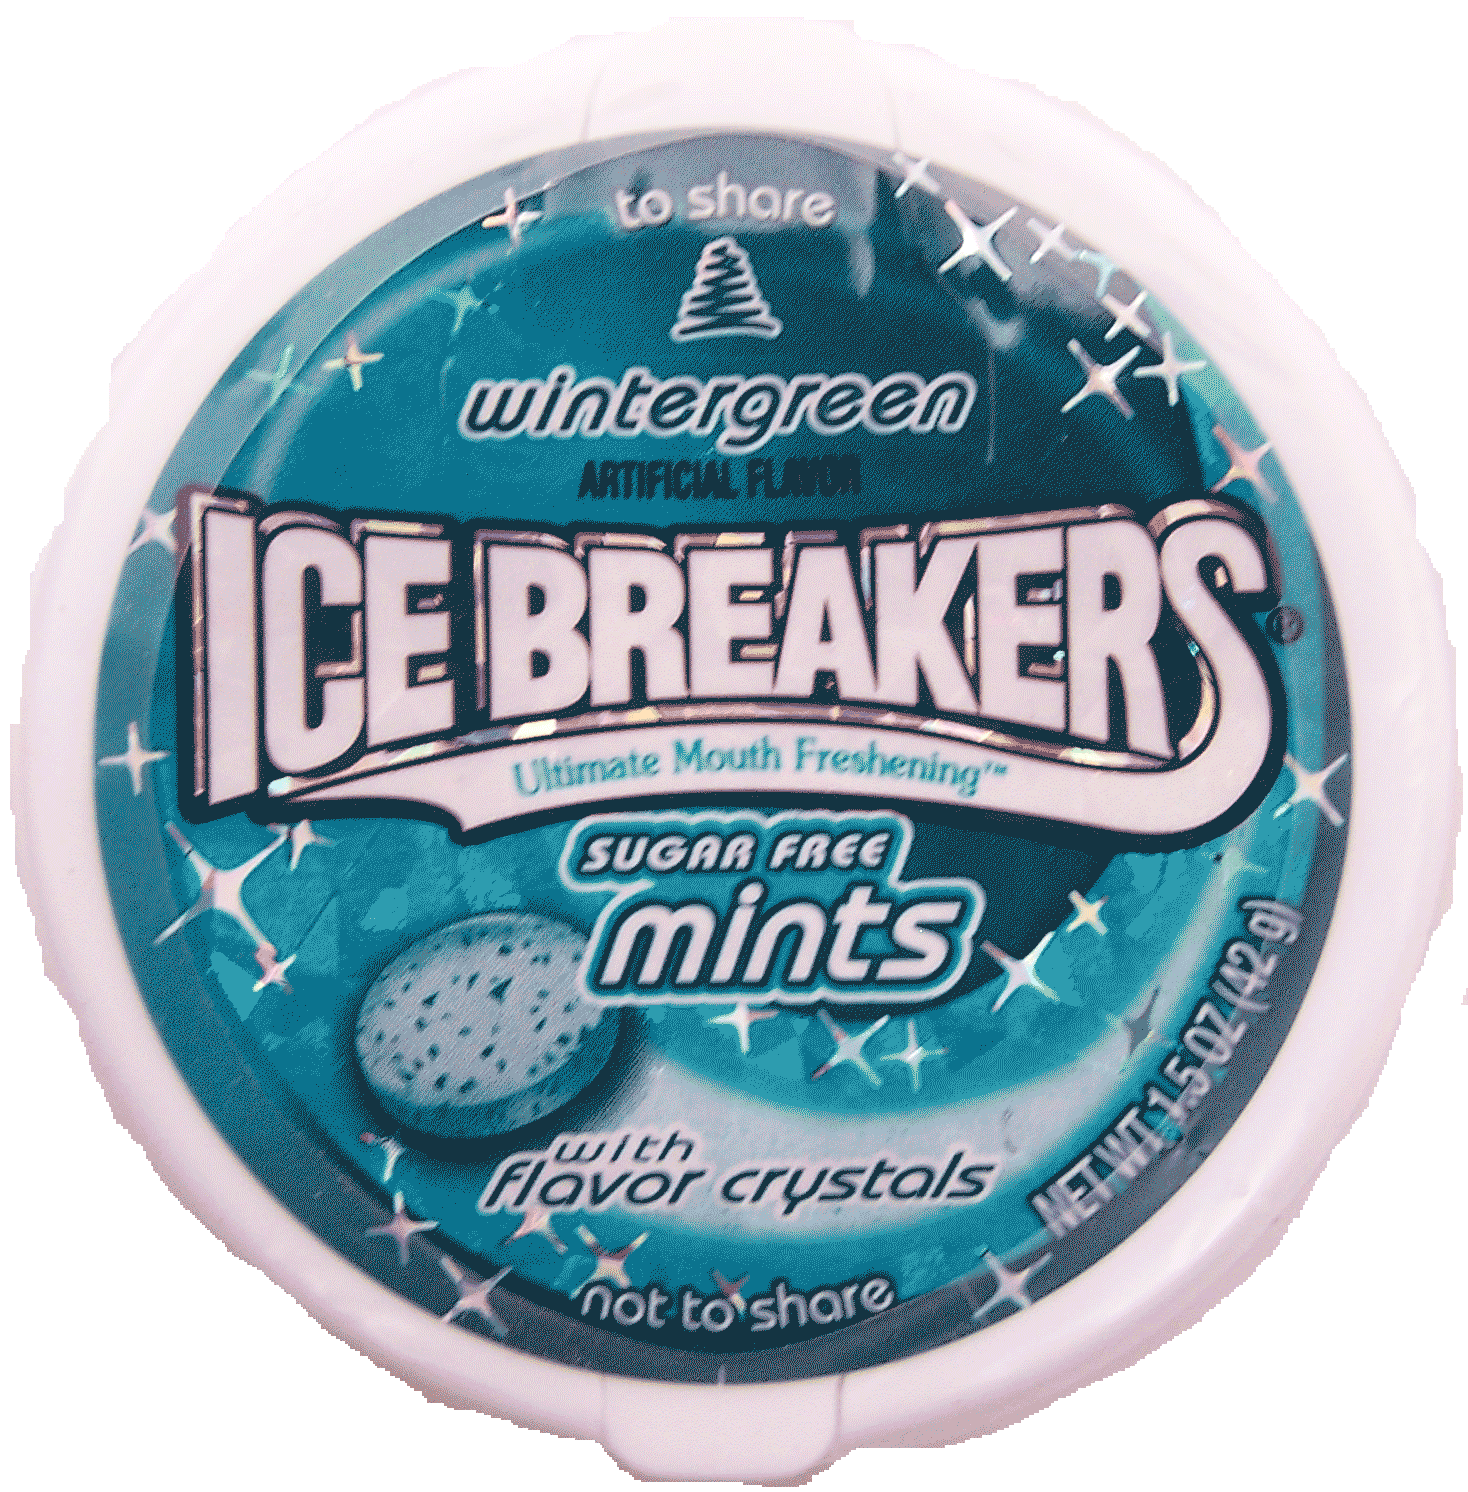 Ice Breakers  sugar free ultimate mouth freshening wintergreen breath mints with flavor crystals Full-Size Picture